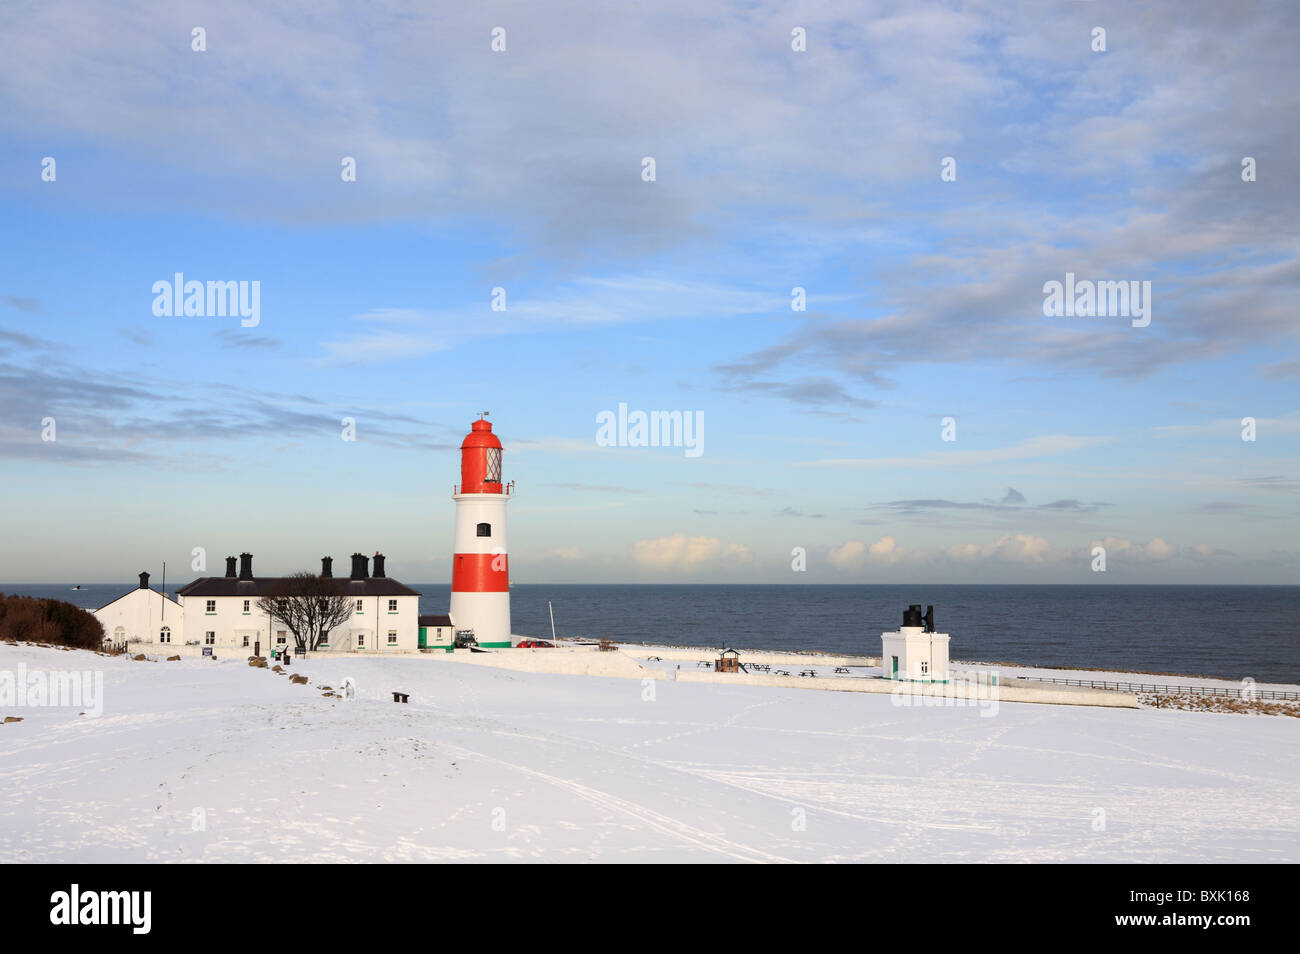 Souter lighthouse and foghorn, Whitburn, with snow on the ground. England, UK. Stock Photo